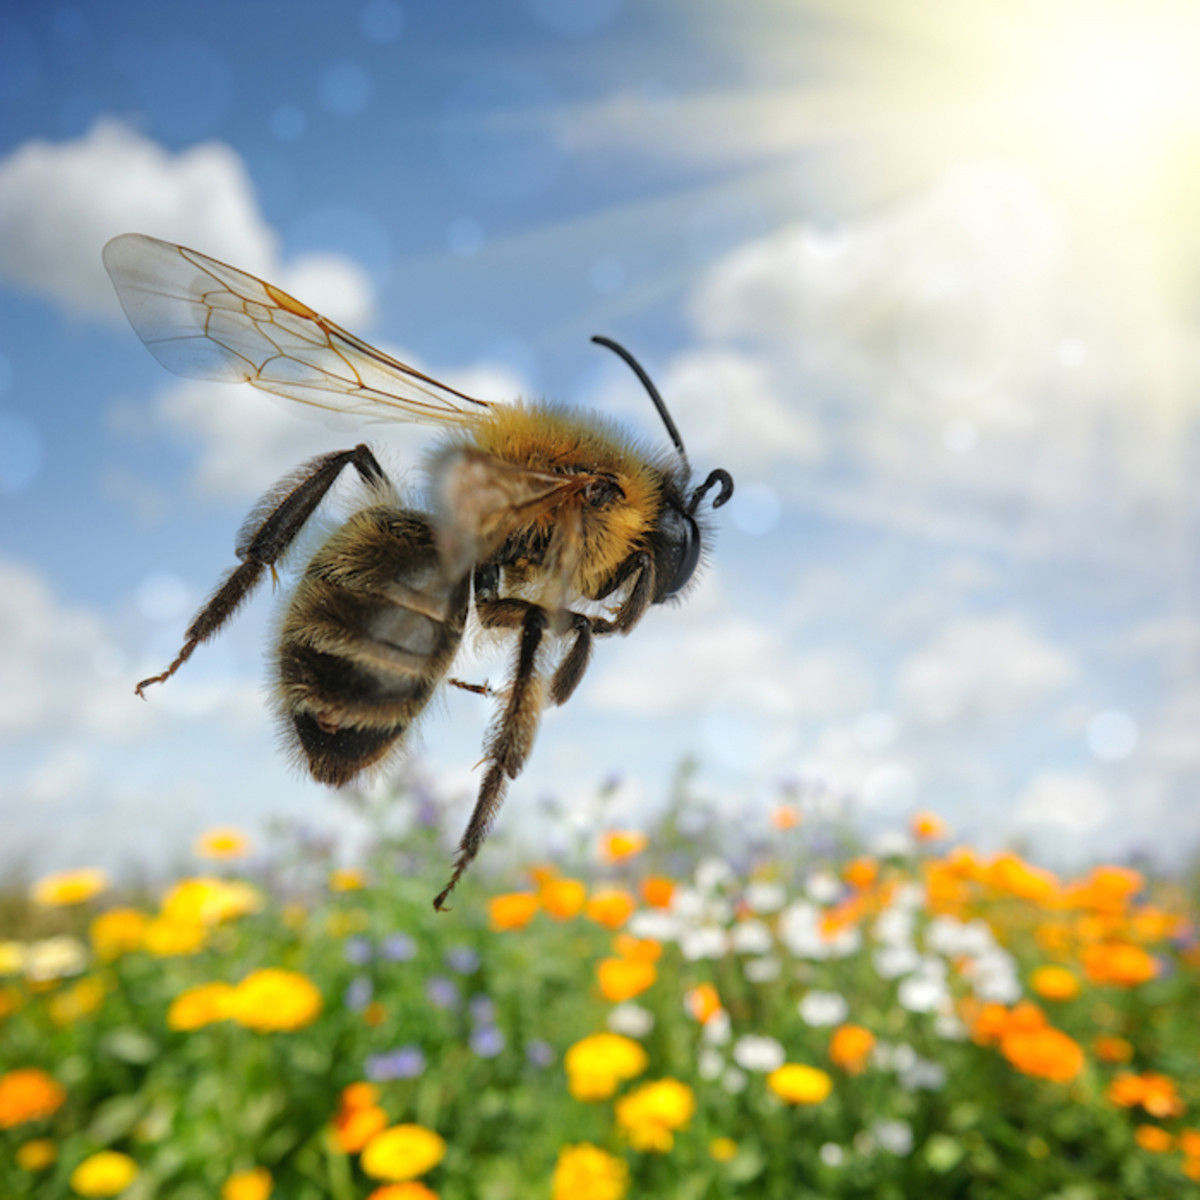 Federal Court Rules in Favor of Honey Bees, Blocks EPA-Approved Pesticide